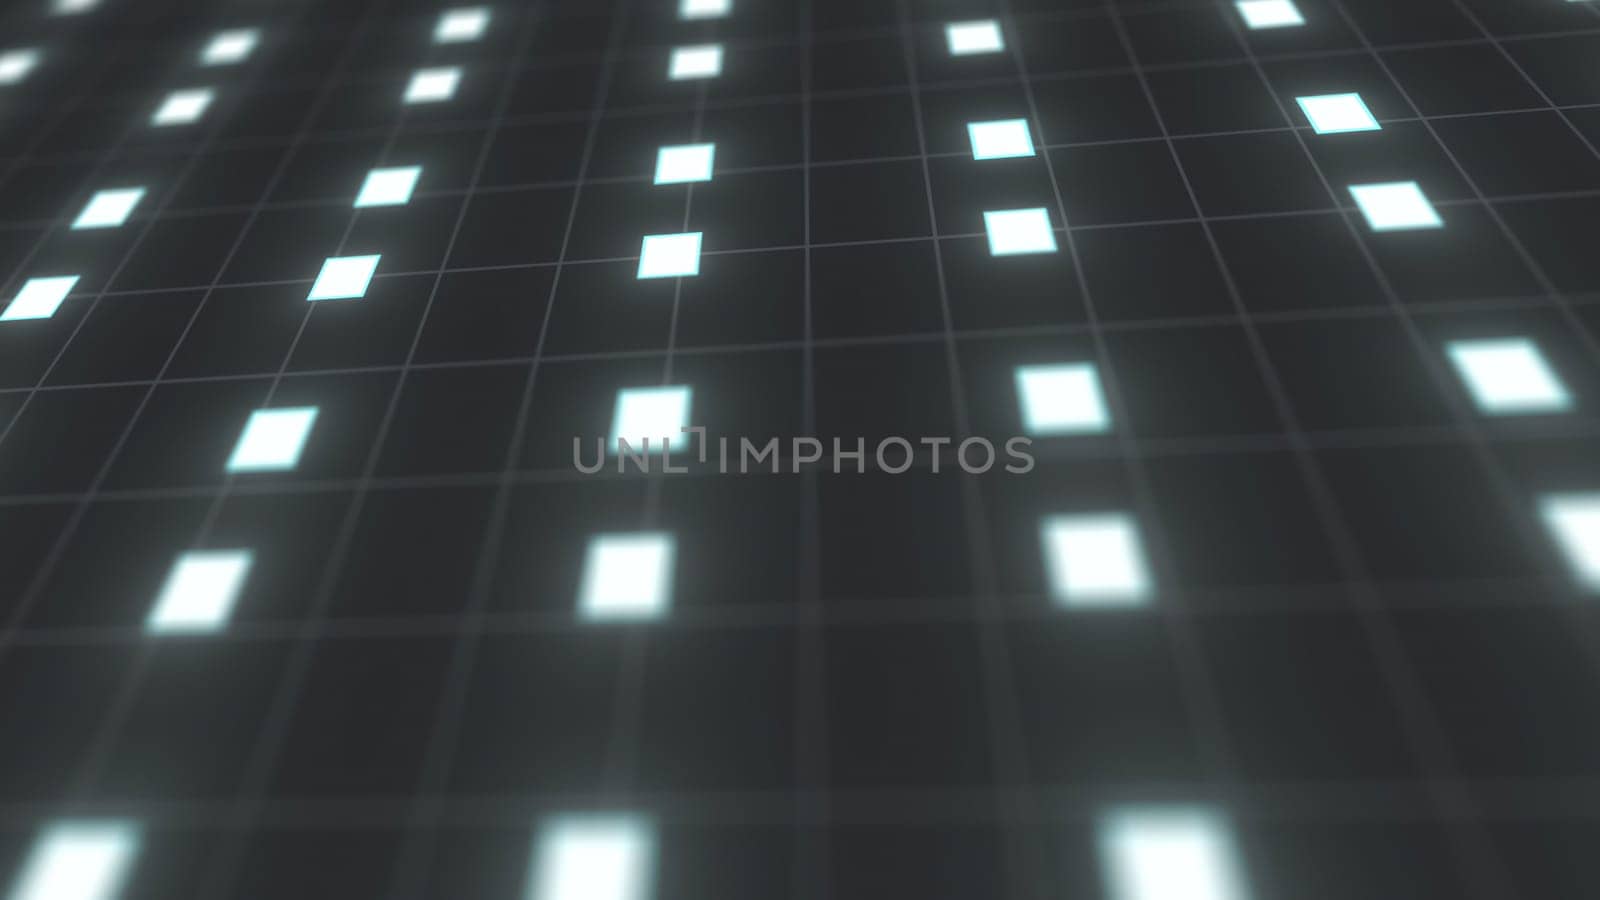 Abstract technology backdrop with squares. Computer generated 3d render